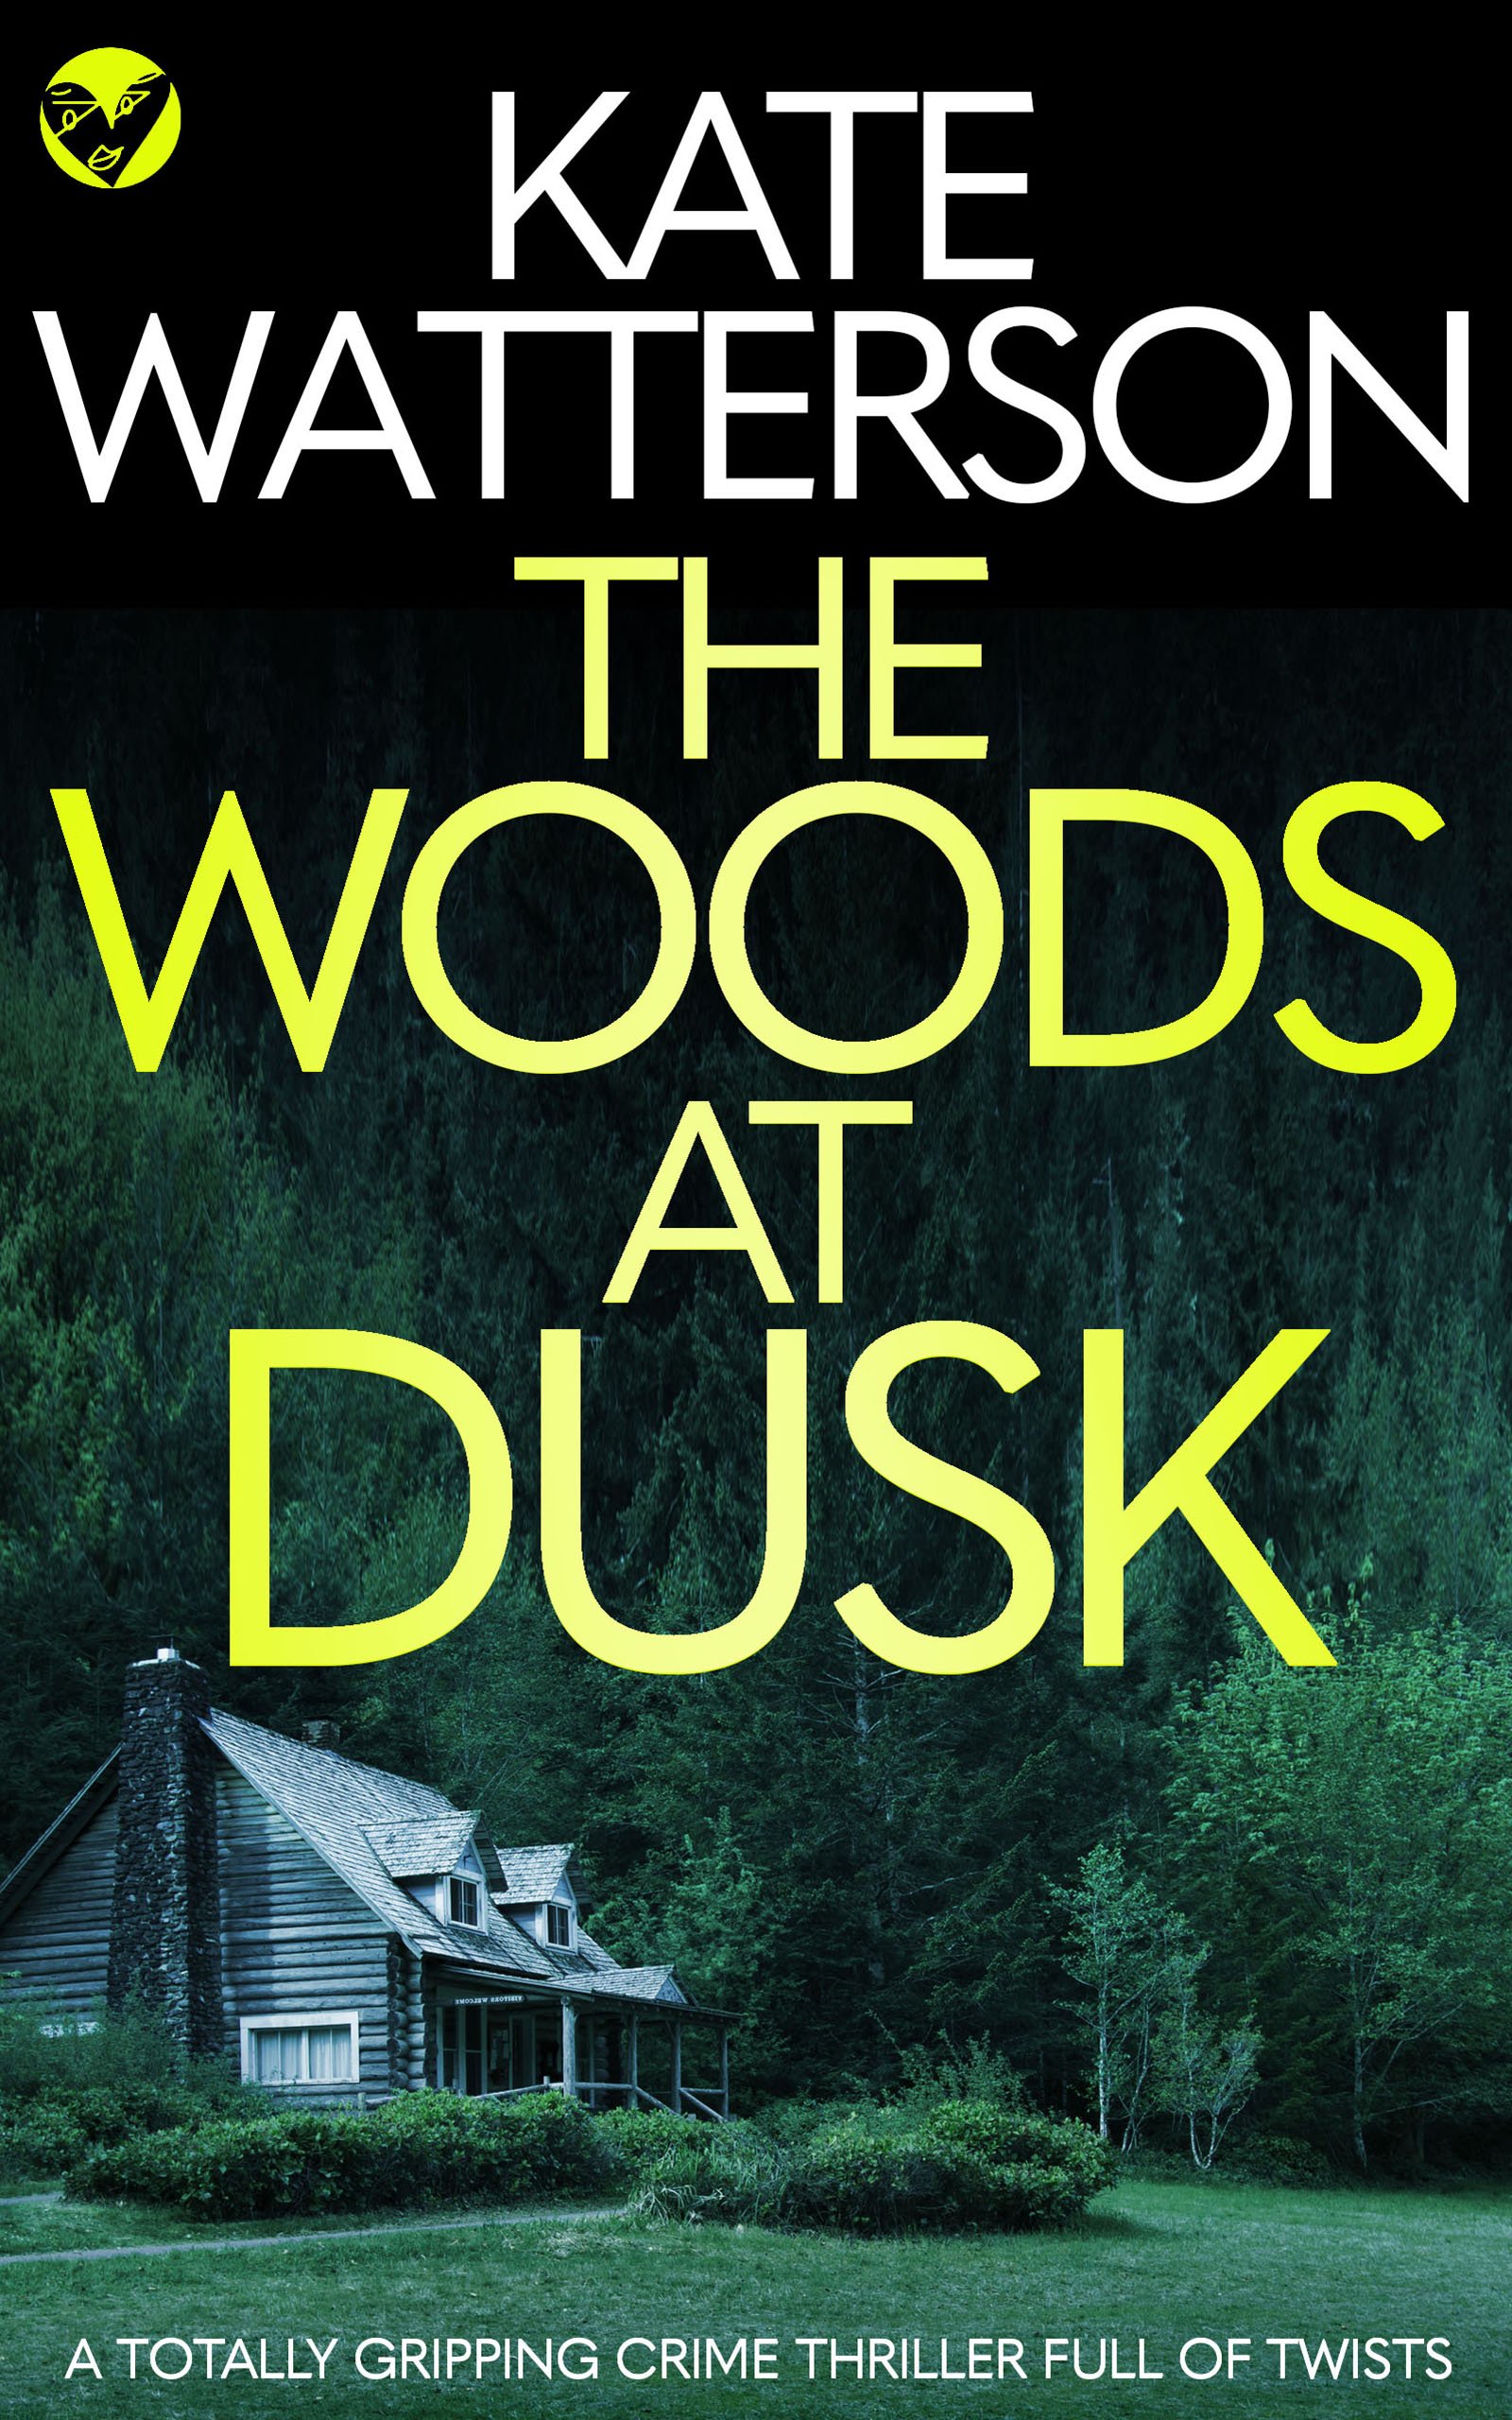 THE WOODS AT DUSK publish cover.jpg